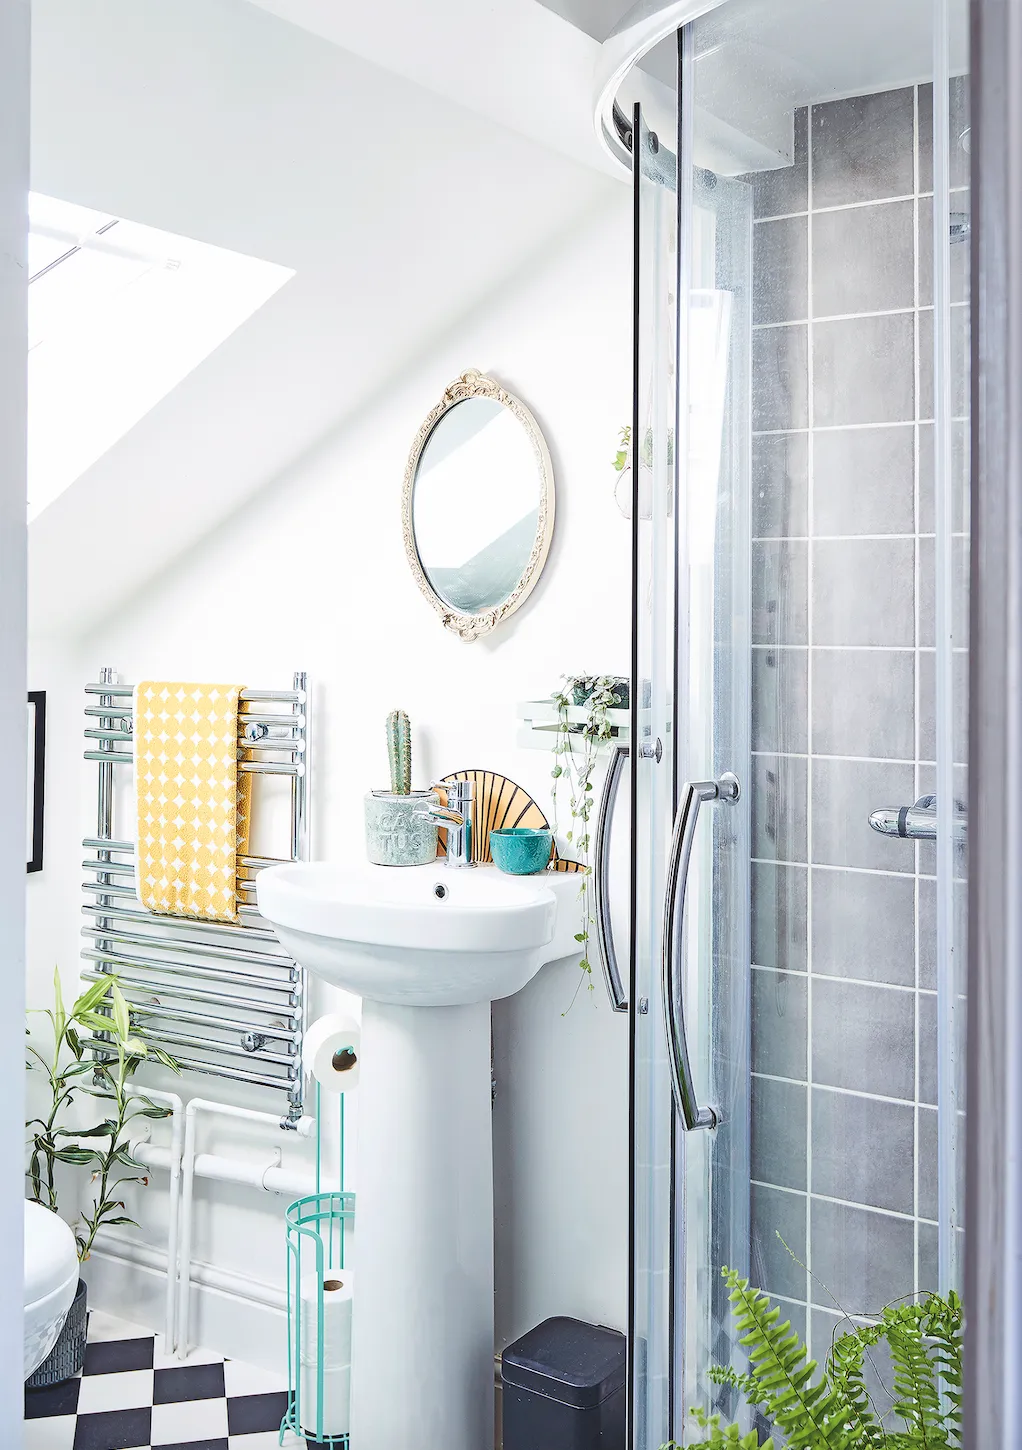 Even though Nikki has kept her petite en suite white and neutral to make it feel lighter and bigger, she’s added splashes of her favourite teals and yellows